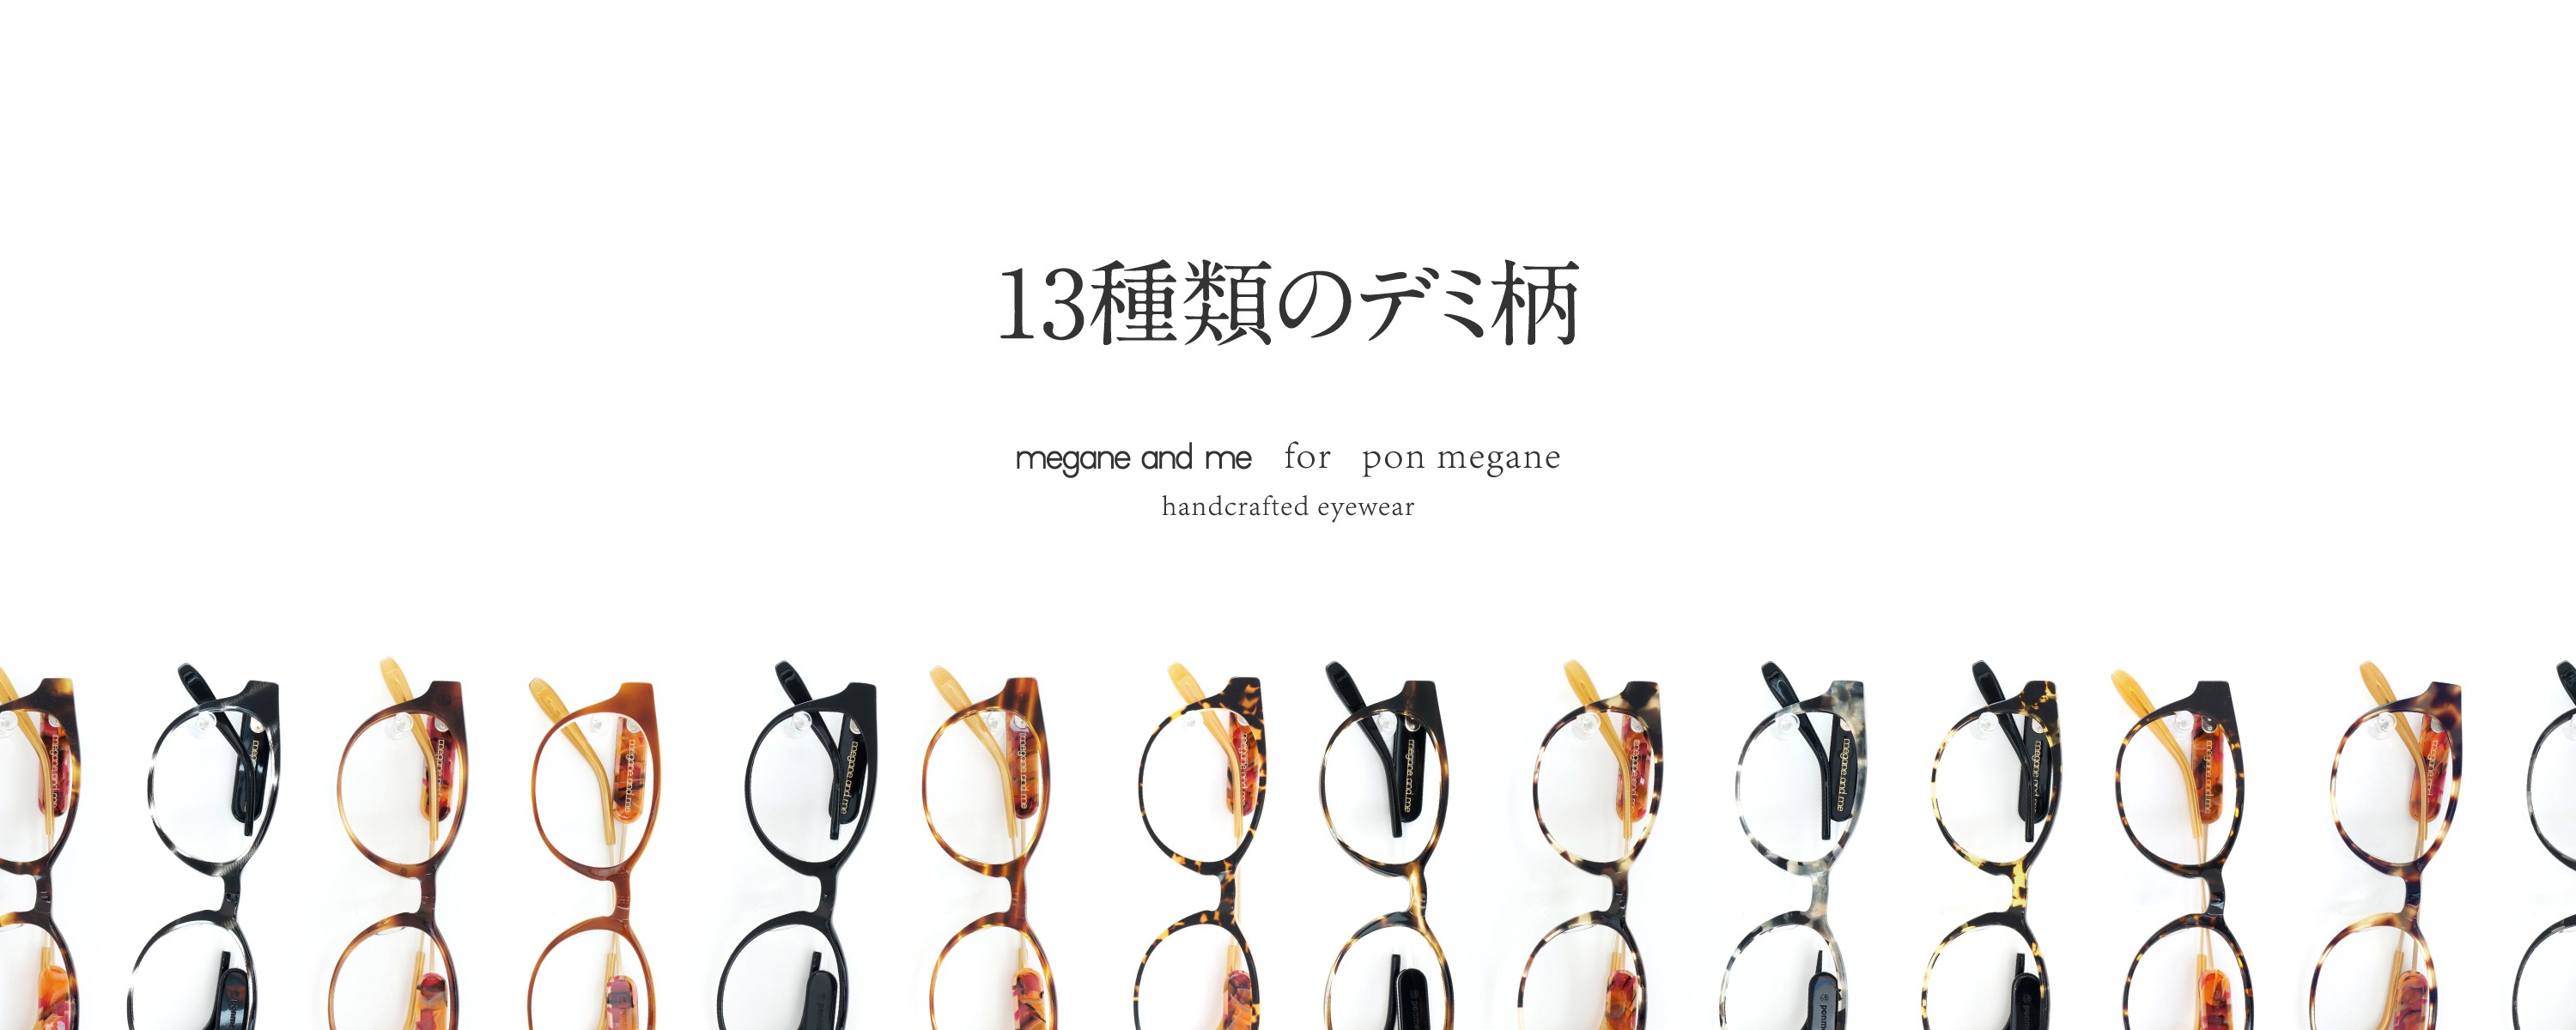 megane and me for ponmegane